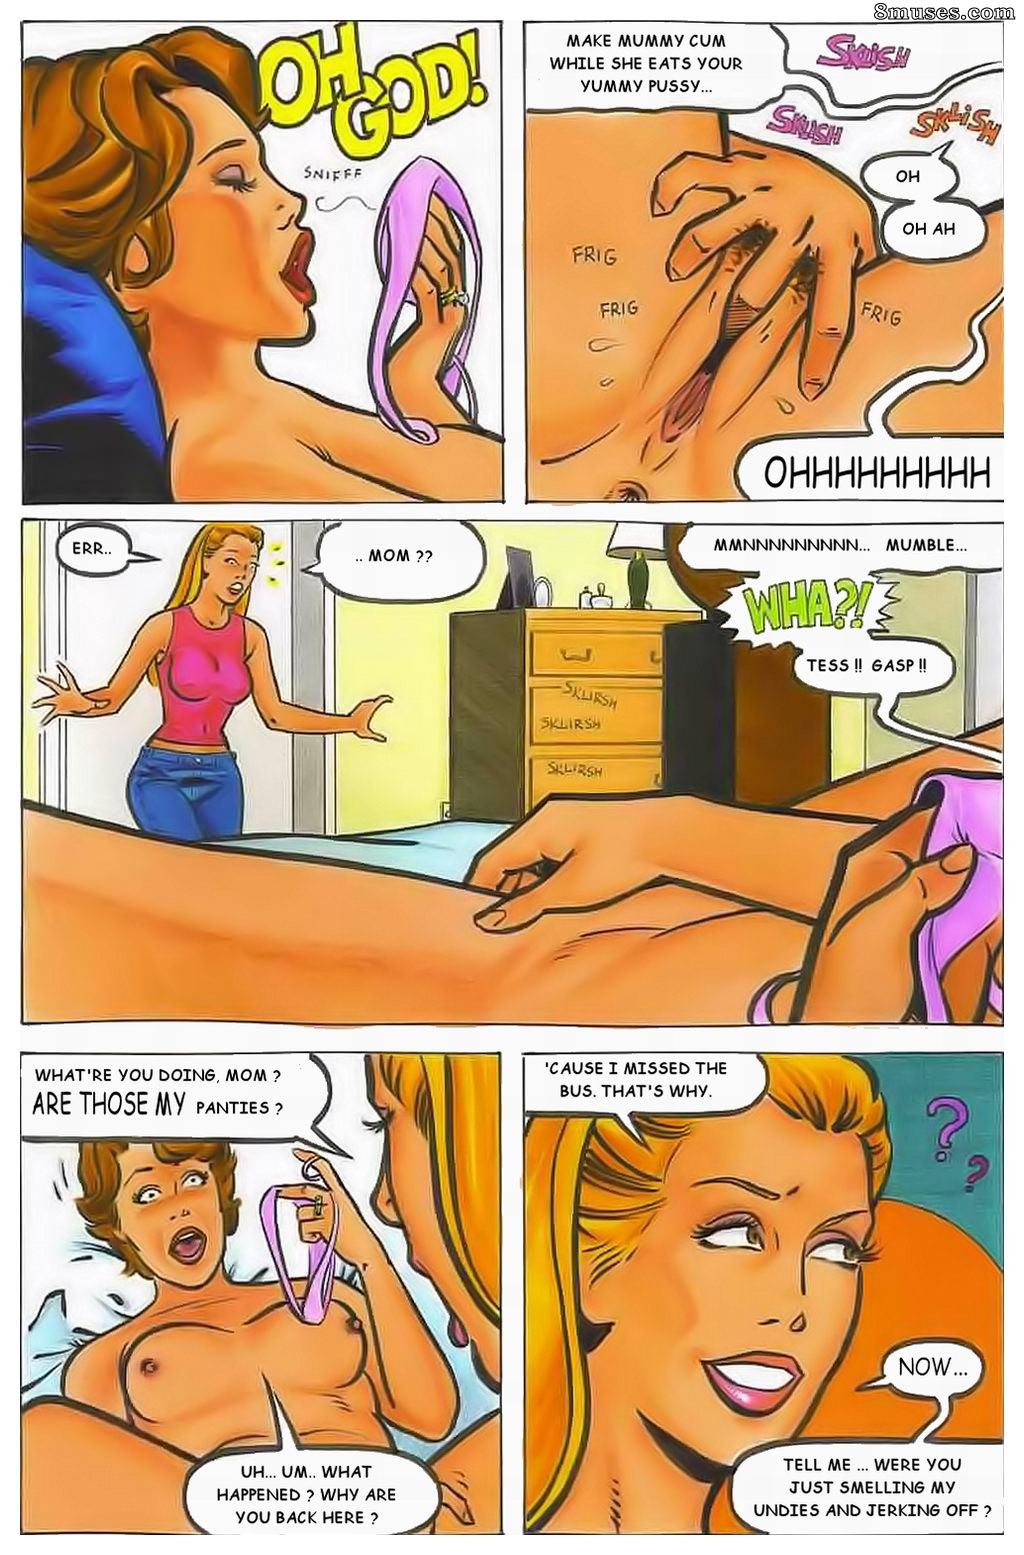 Housewives at Play - The Series Issue 17 - 8muses Comics - Sex Comics and Porn  Cartoons